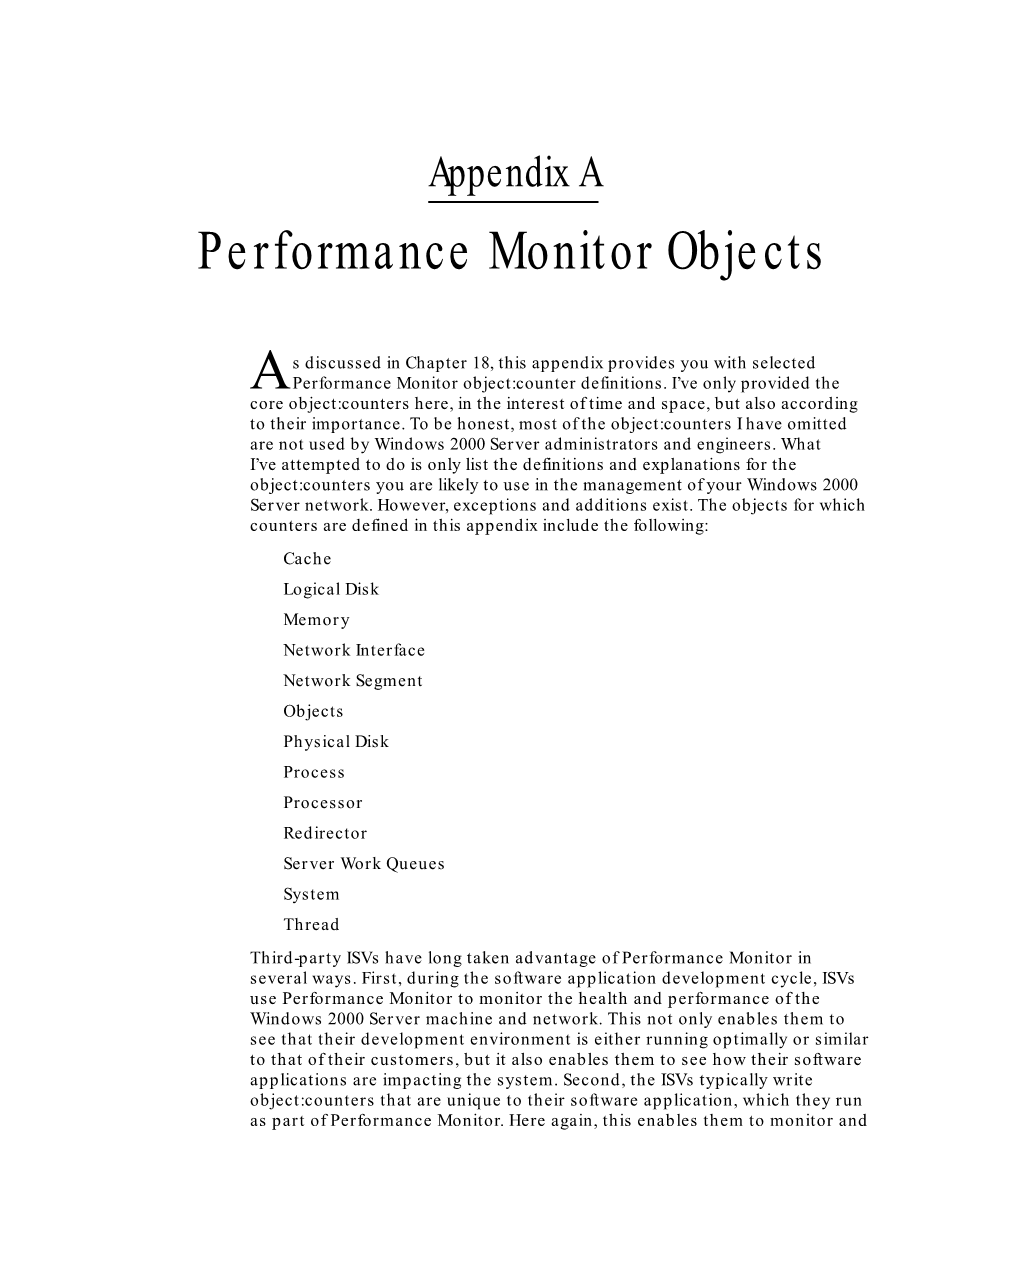 Performance Monitor Objects